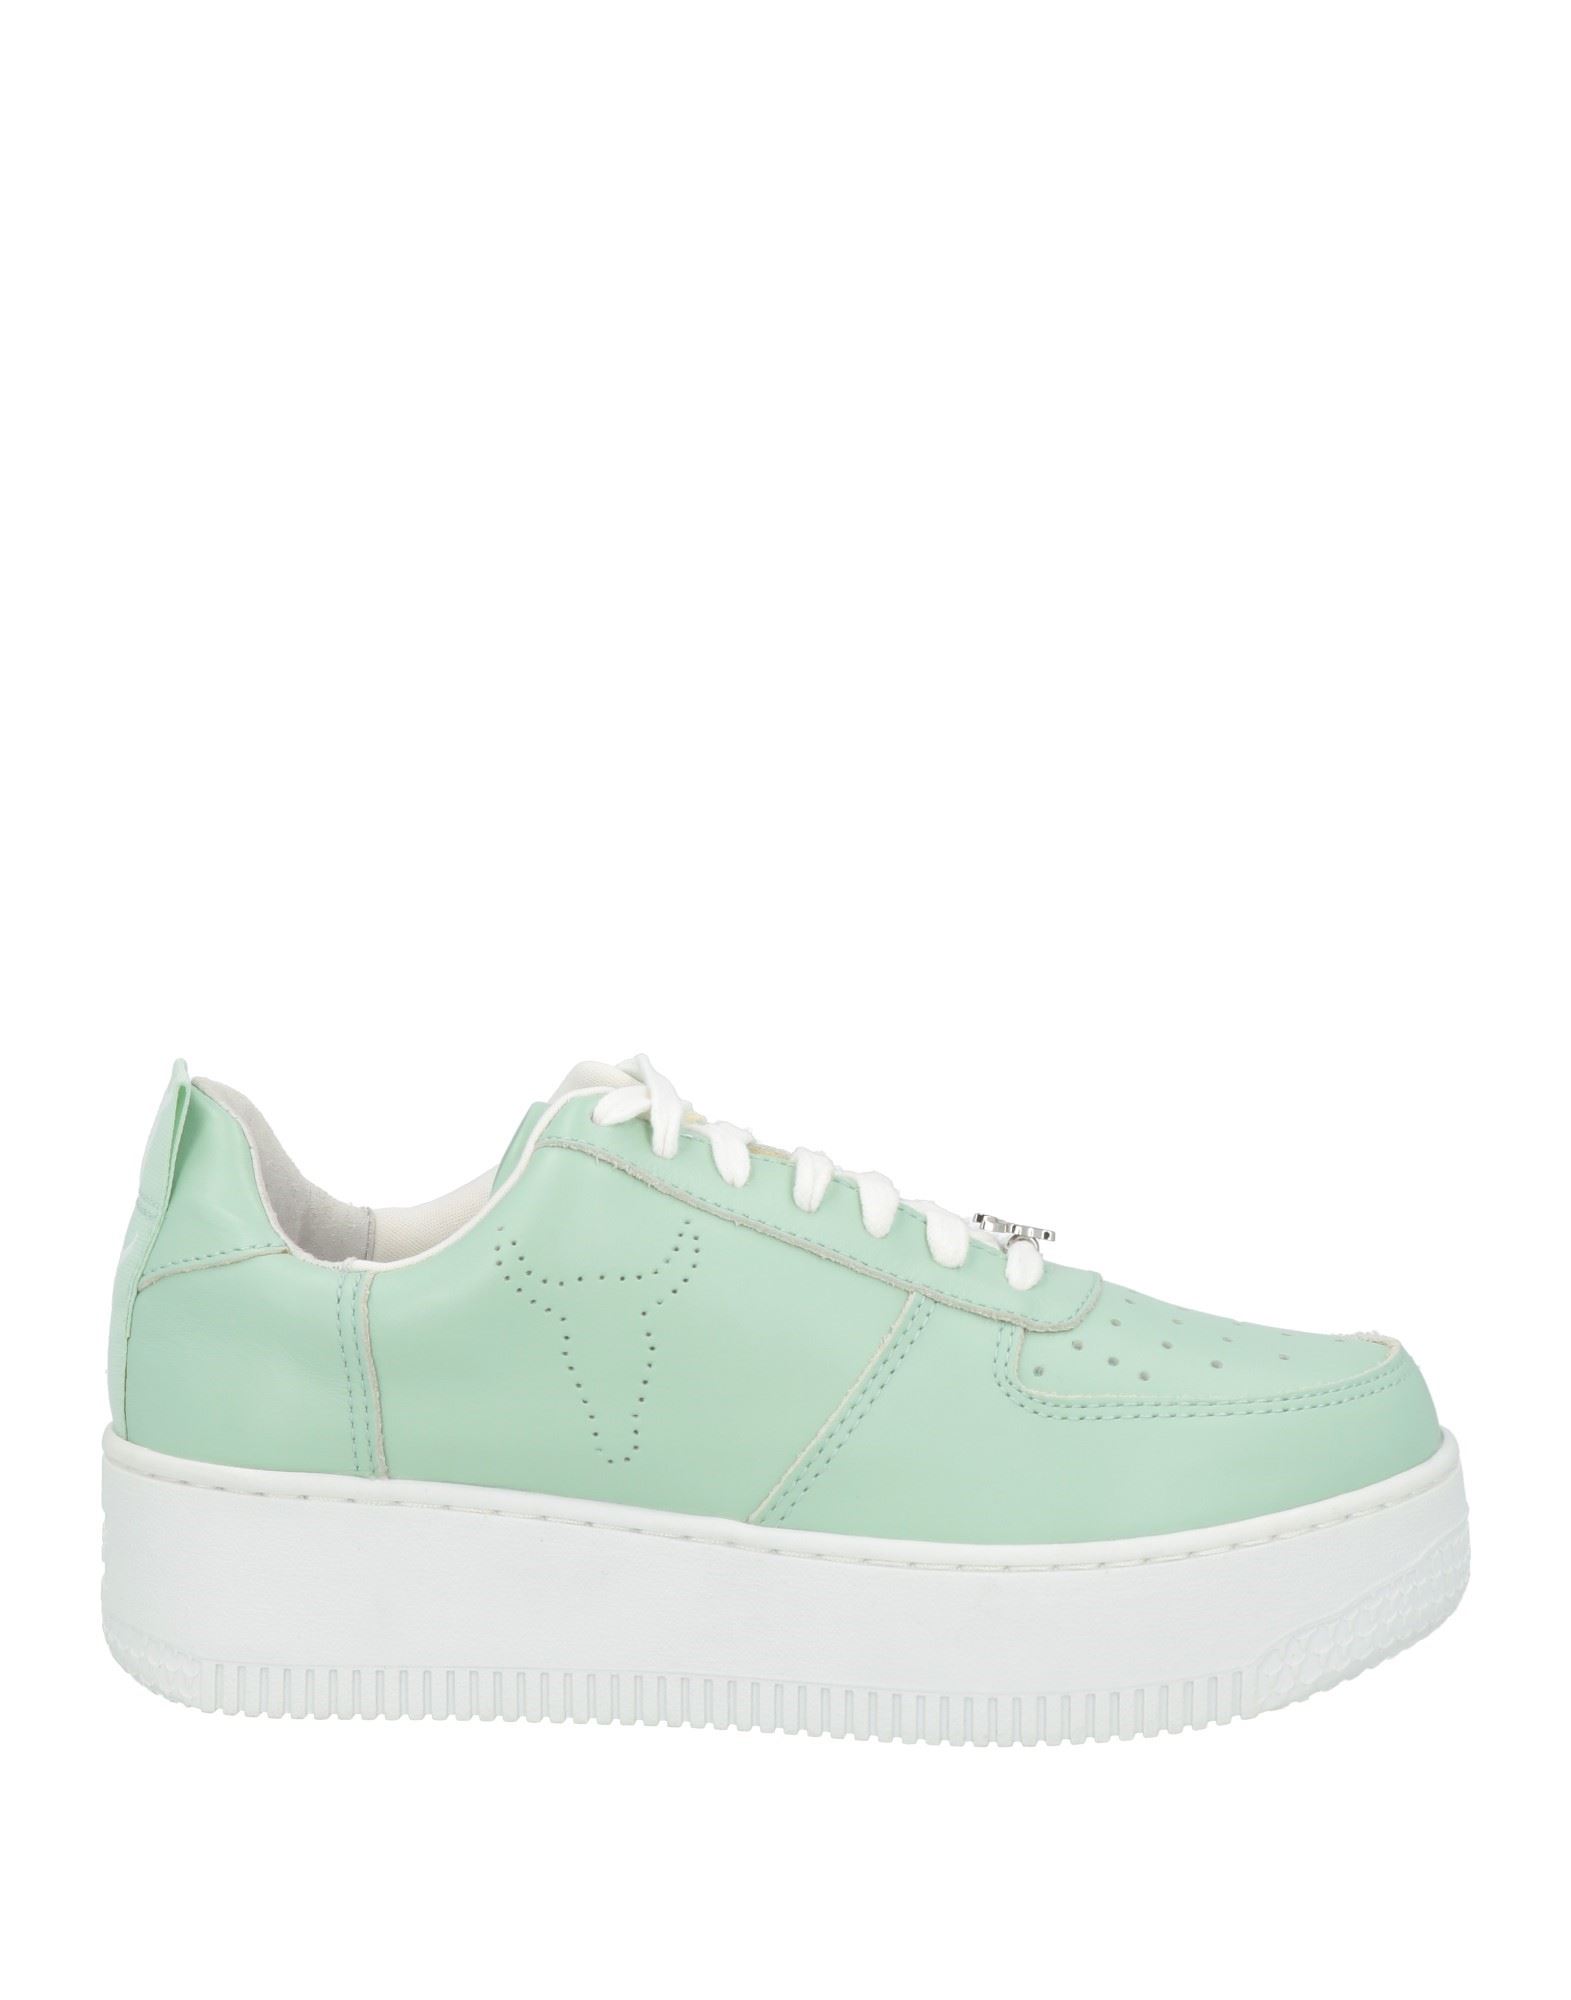 WINDSOR SMITH WINDSOR SMITH WOMAN SNEAKERS LIGHT GREEN SIZE 9 LEATHER,11264531RF 11